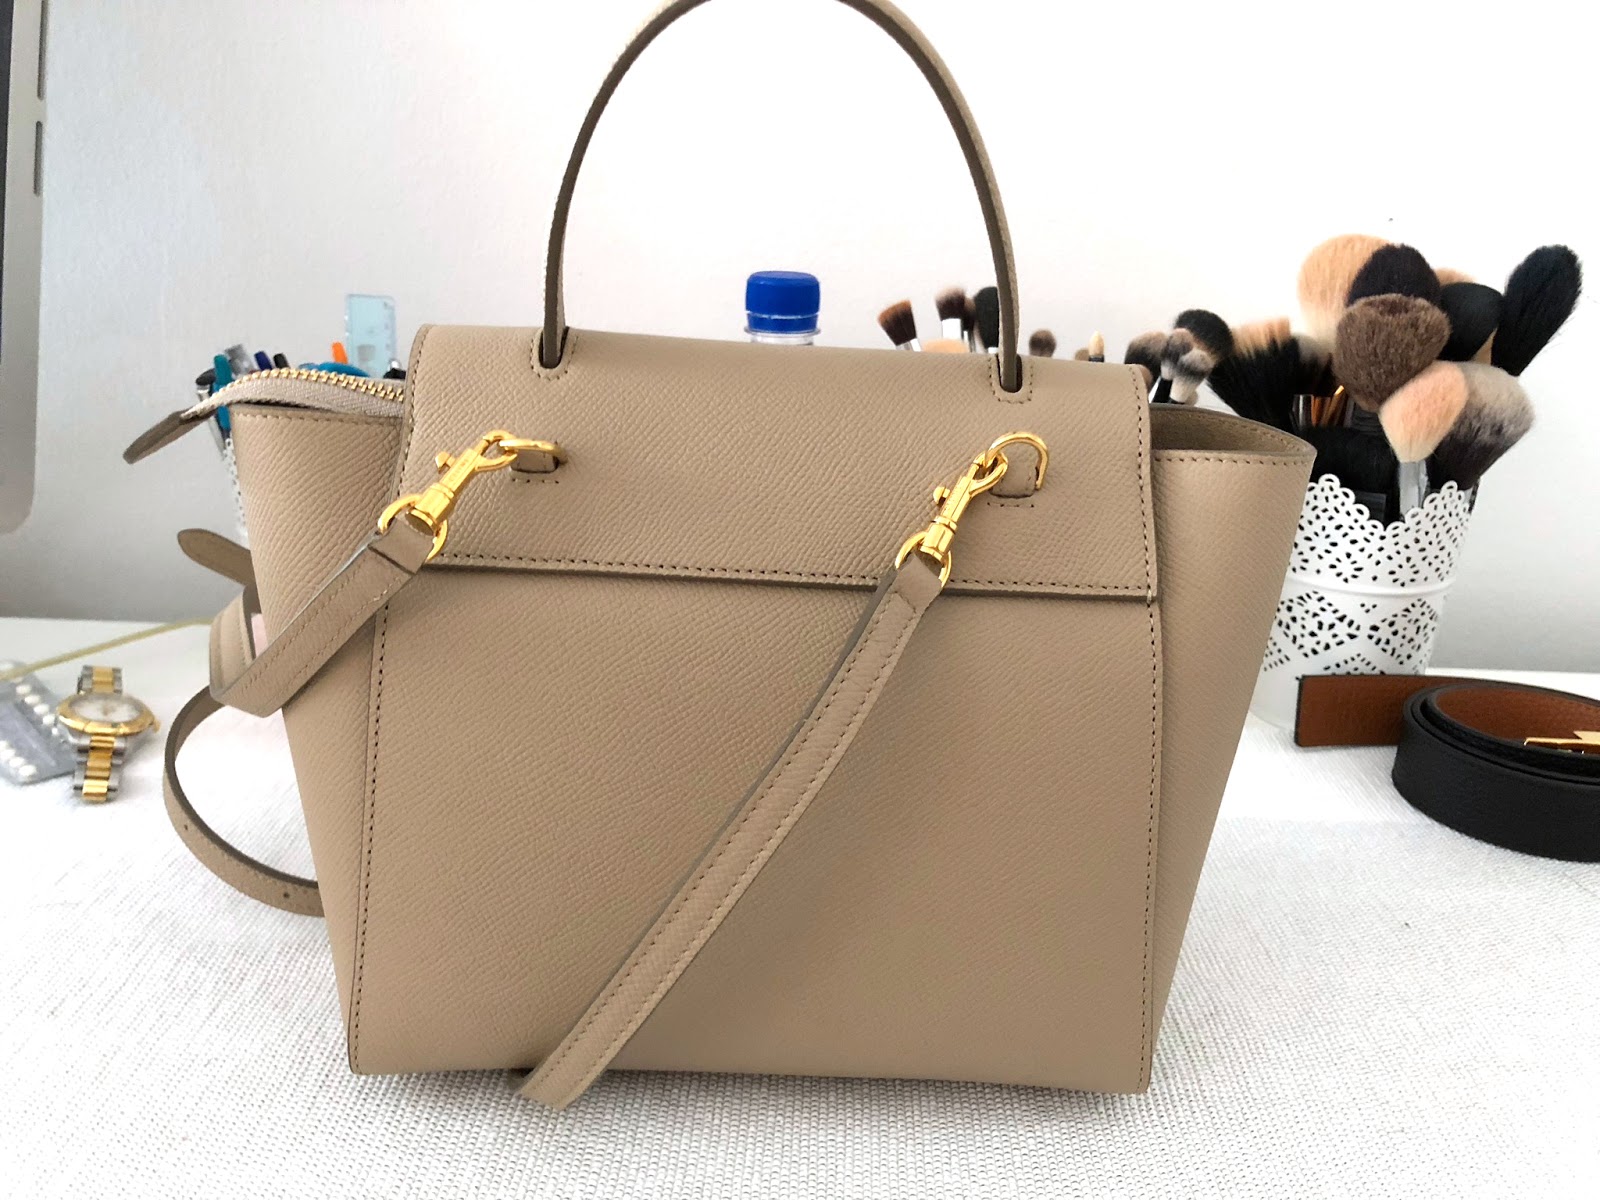 Is it hard to match the Celine belt bag in e with your